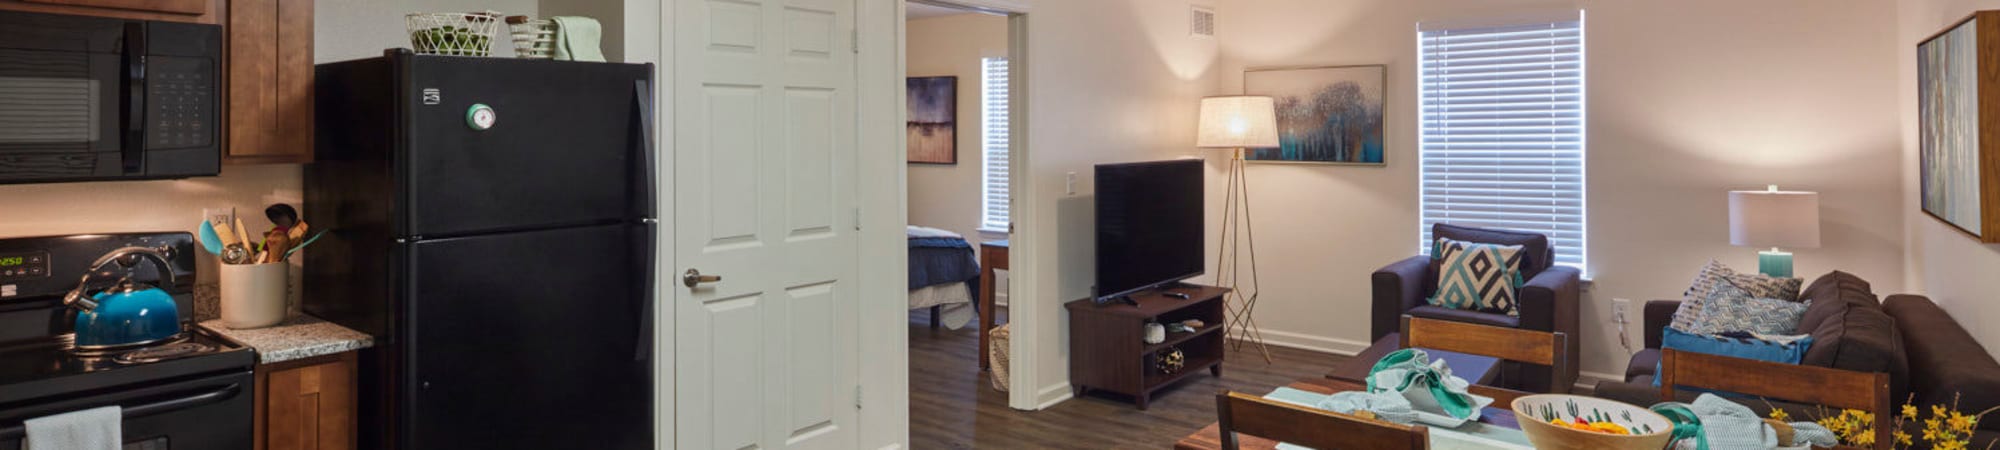 Affordable 1 2 3 Bedroom Student Apartments In Louisville Ky